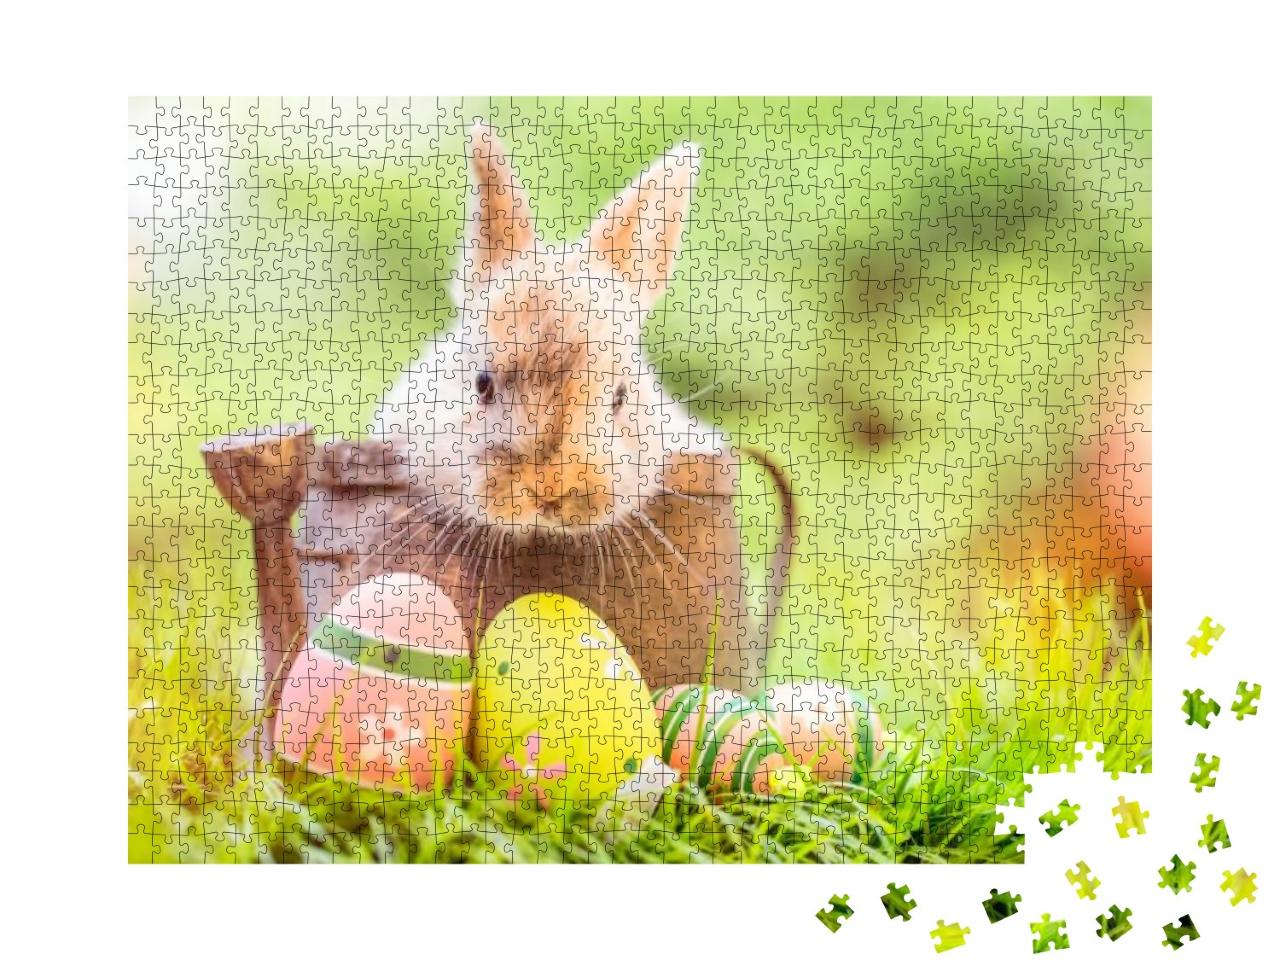 Small, Baby Rabbit in Easter Basket with Fluffy Fur & Eas... Jigsaw Puzzle with 1000 pieces